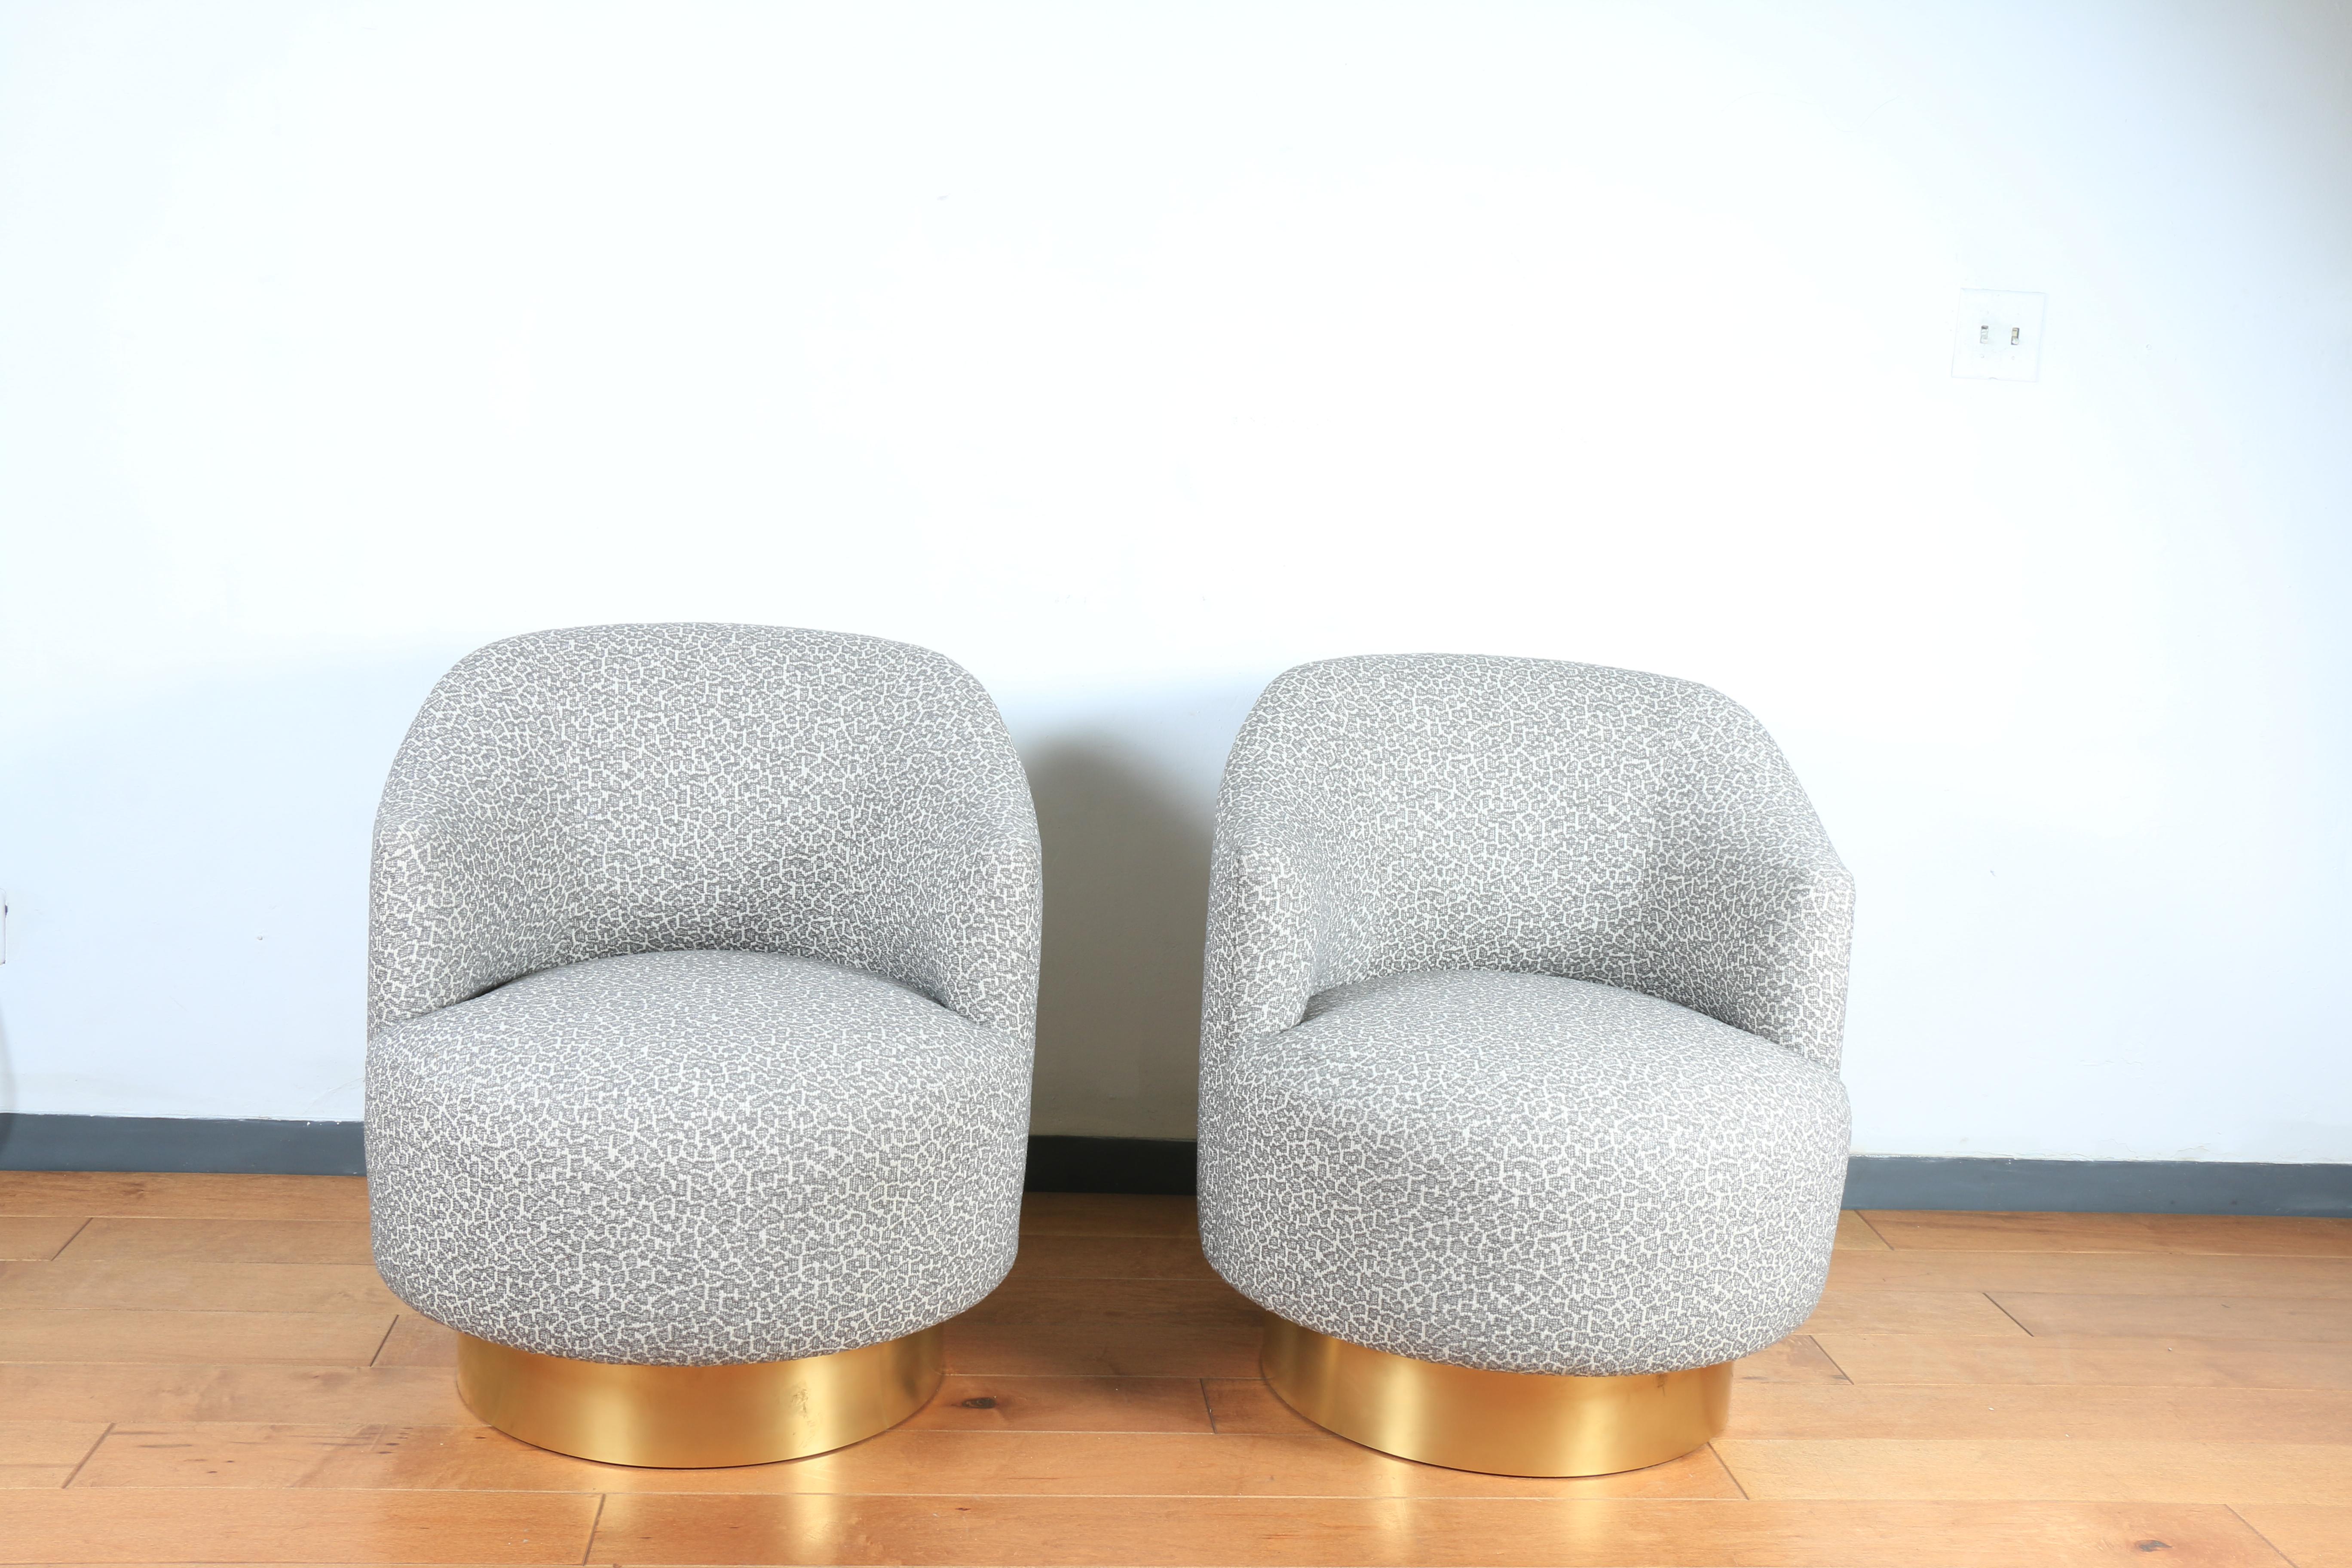 Milo Baughman-style chairs with brass base. These chairs are round and have a round brass base as well. They are used as side chairs. Both chairs have been reupholstered and clean. Cute and comfortable design. Brass swivel bas is well kept.